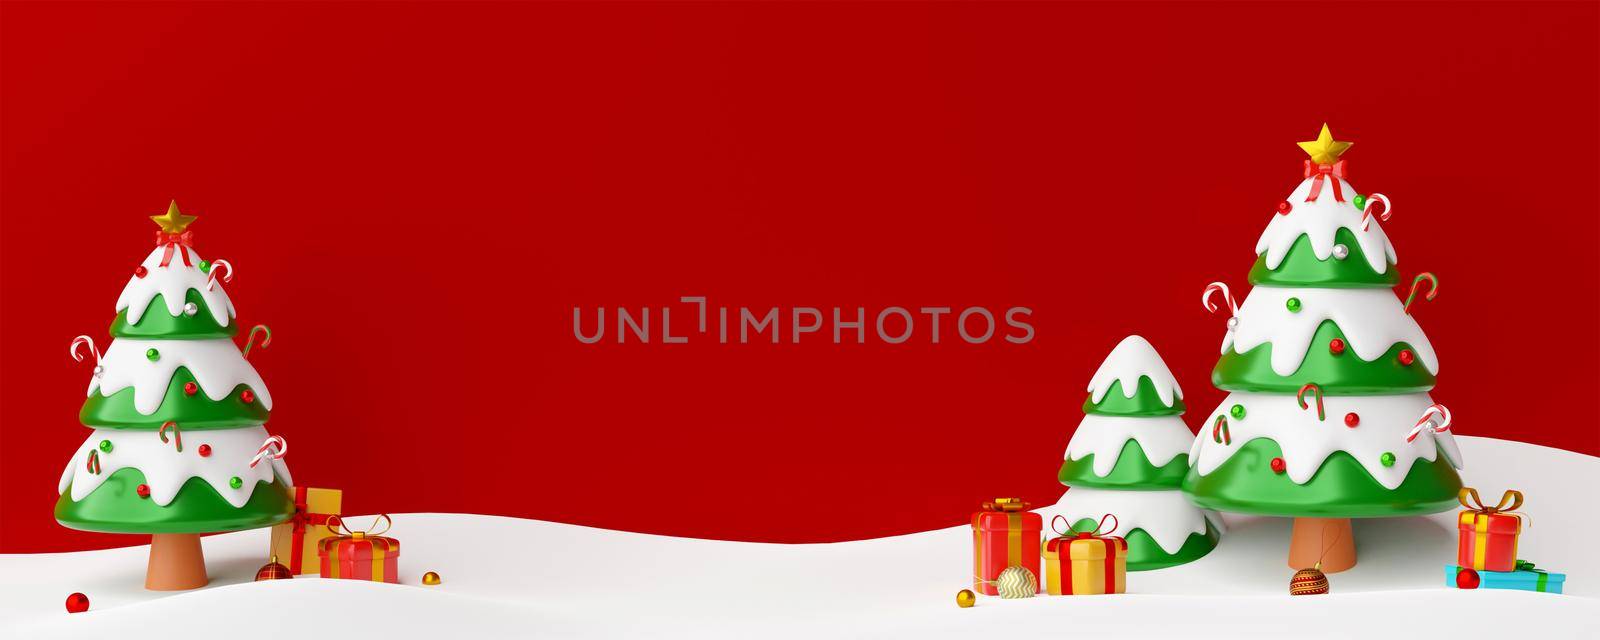 Christmas banner postcard scene of Christmas tree with presents, 3d illustration